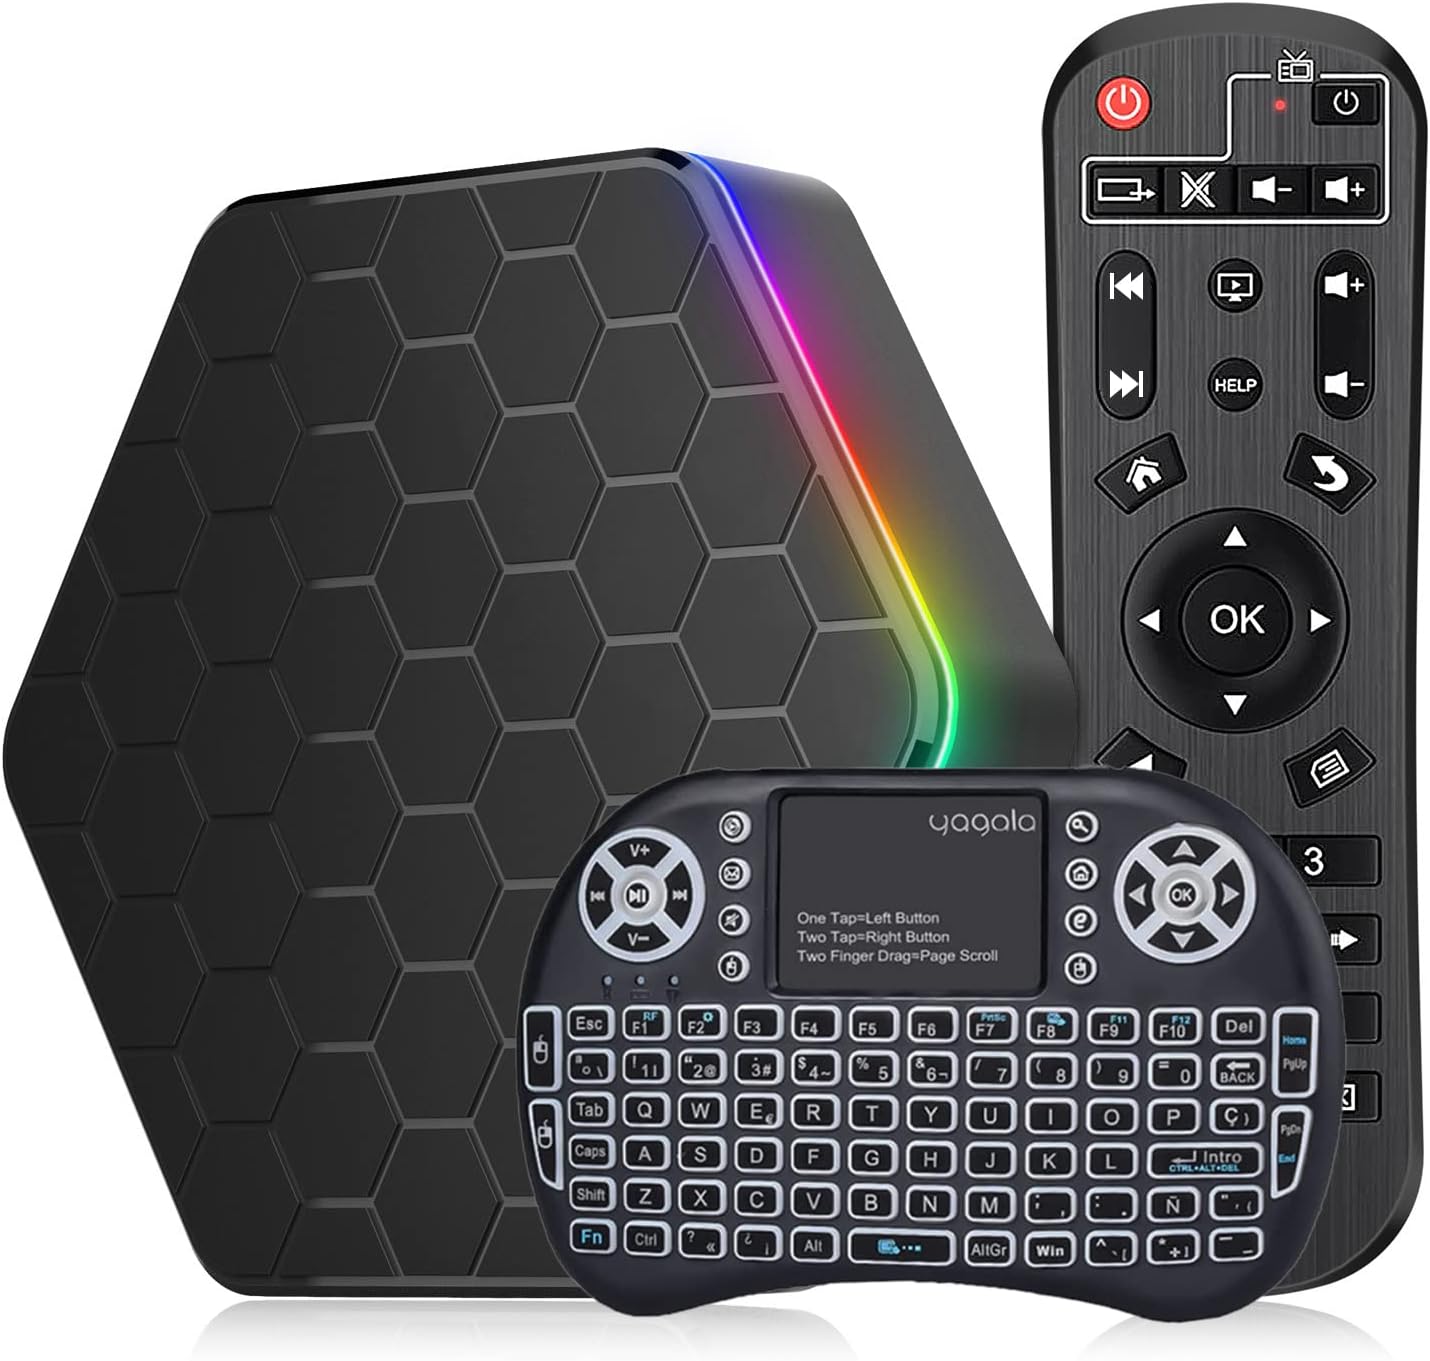 Android 12.0 TV Box, Android Box with 4GB RAM 64GB ROM Allwinner H618 Quad-Core 64-Bit ARM Corter-A53-CPU 6K Resolution 2.4GHz / 5GHz WiFi6 10/100M LAN Enternet Bluetooth 5.0 with Mini Keyboard TV Box